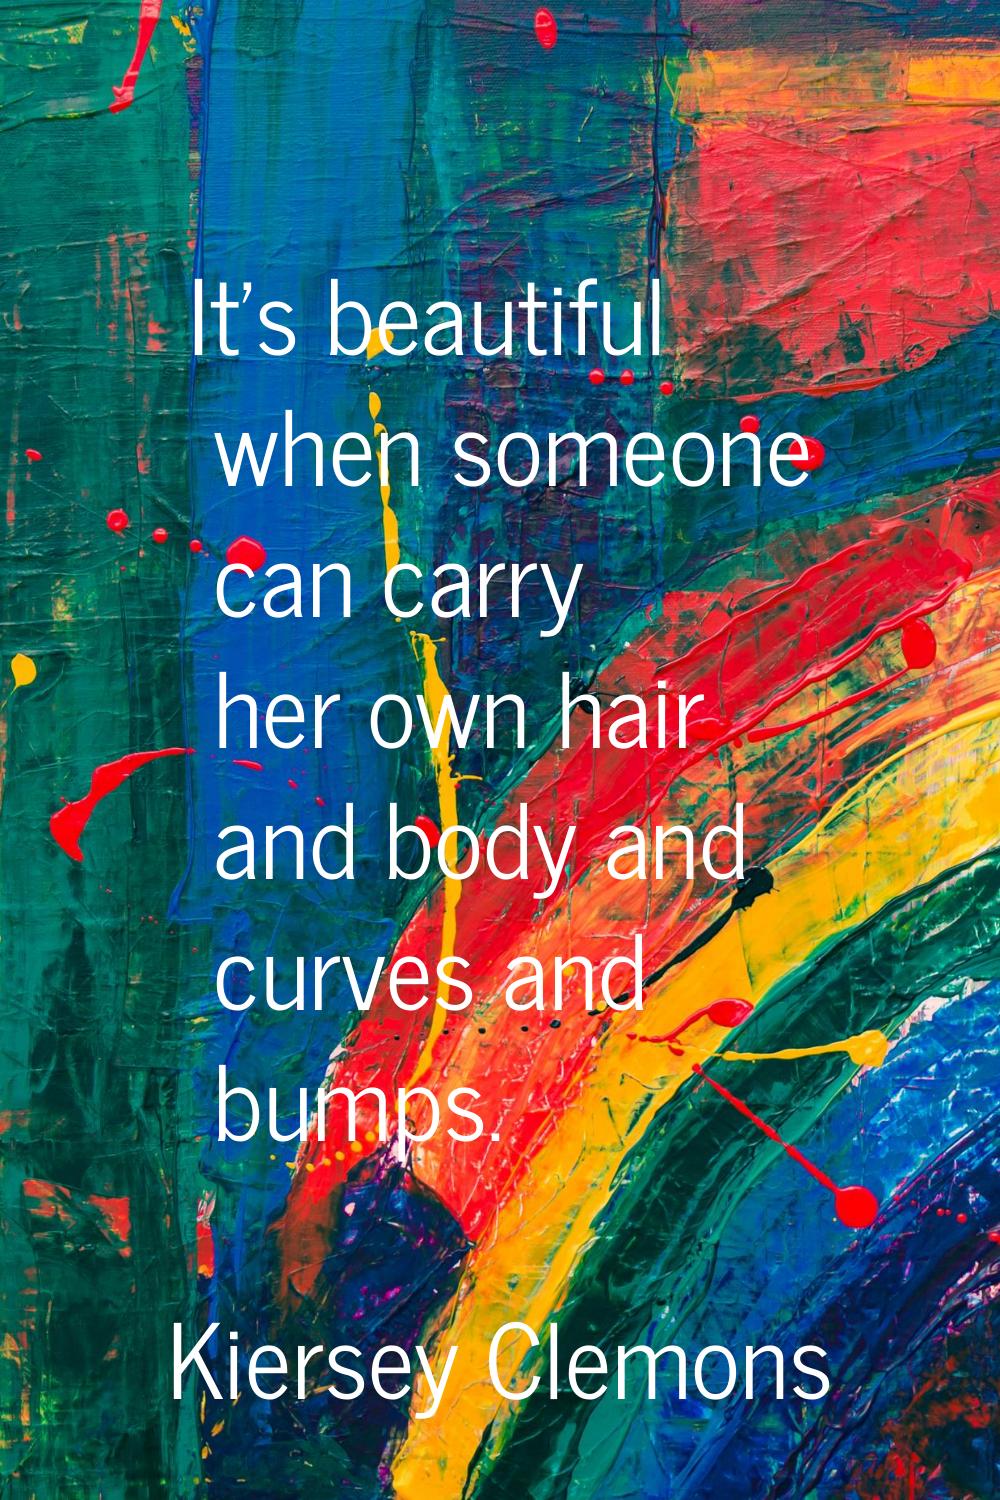 It's beautiful when someone can carry her own hair and body and curves and bumps.